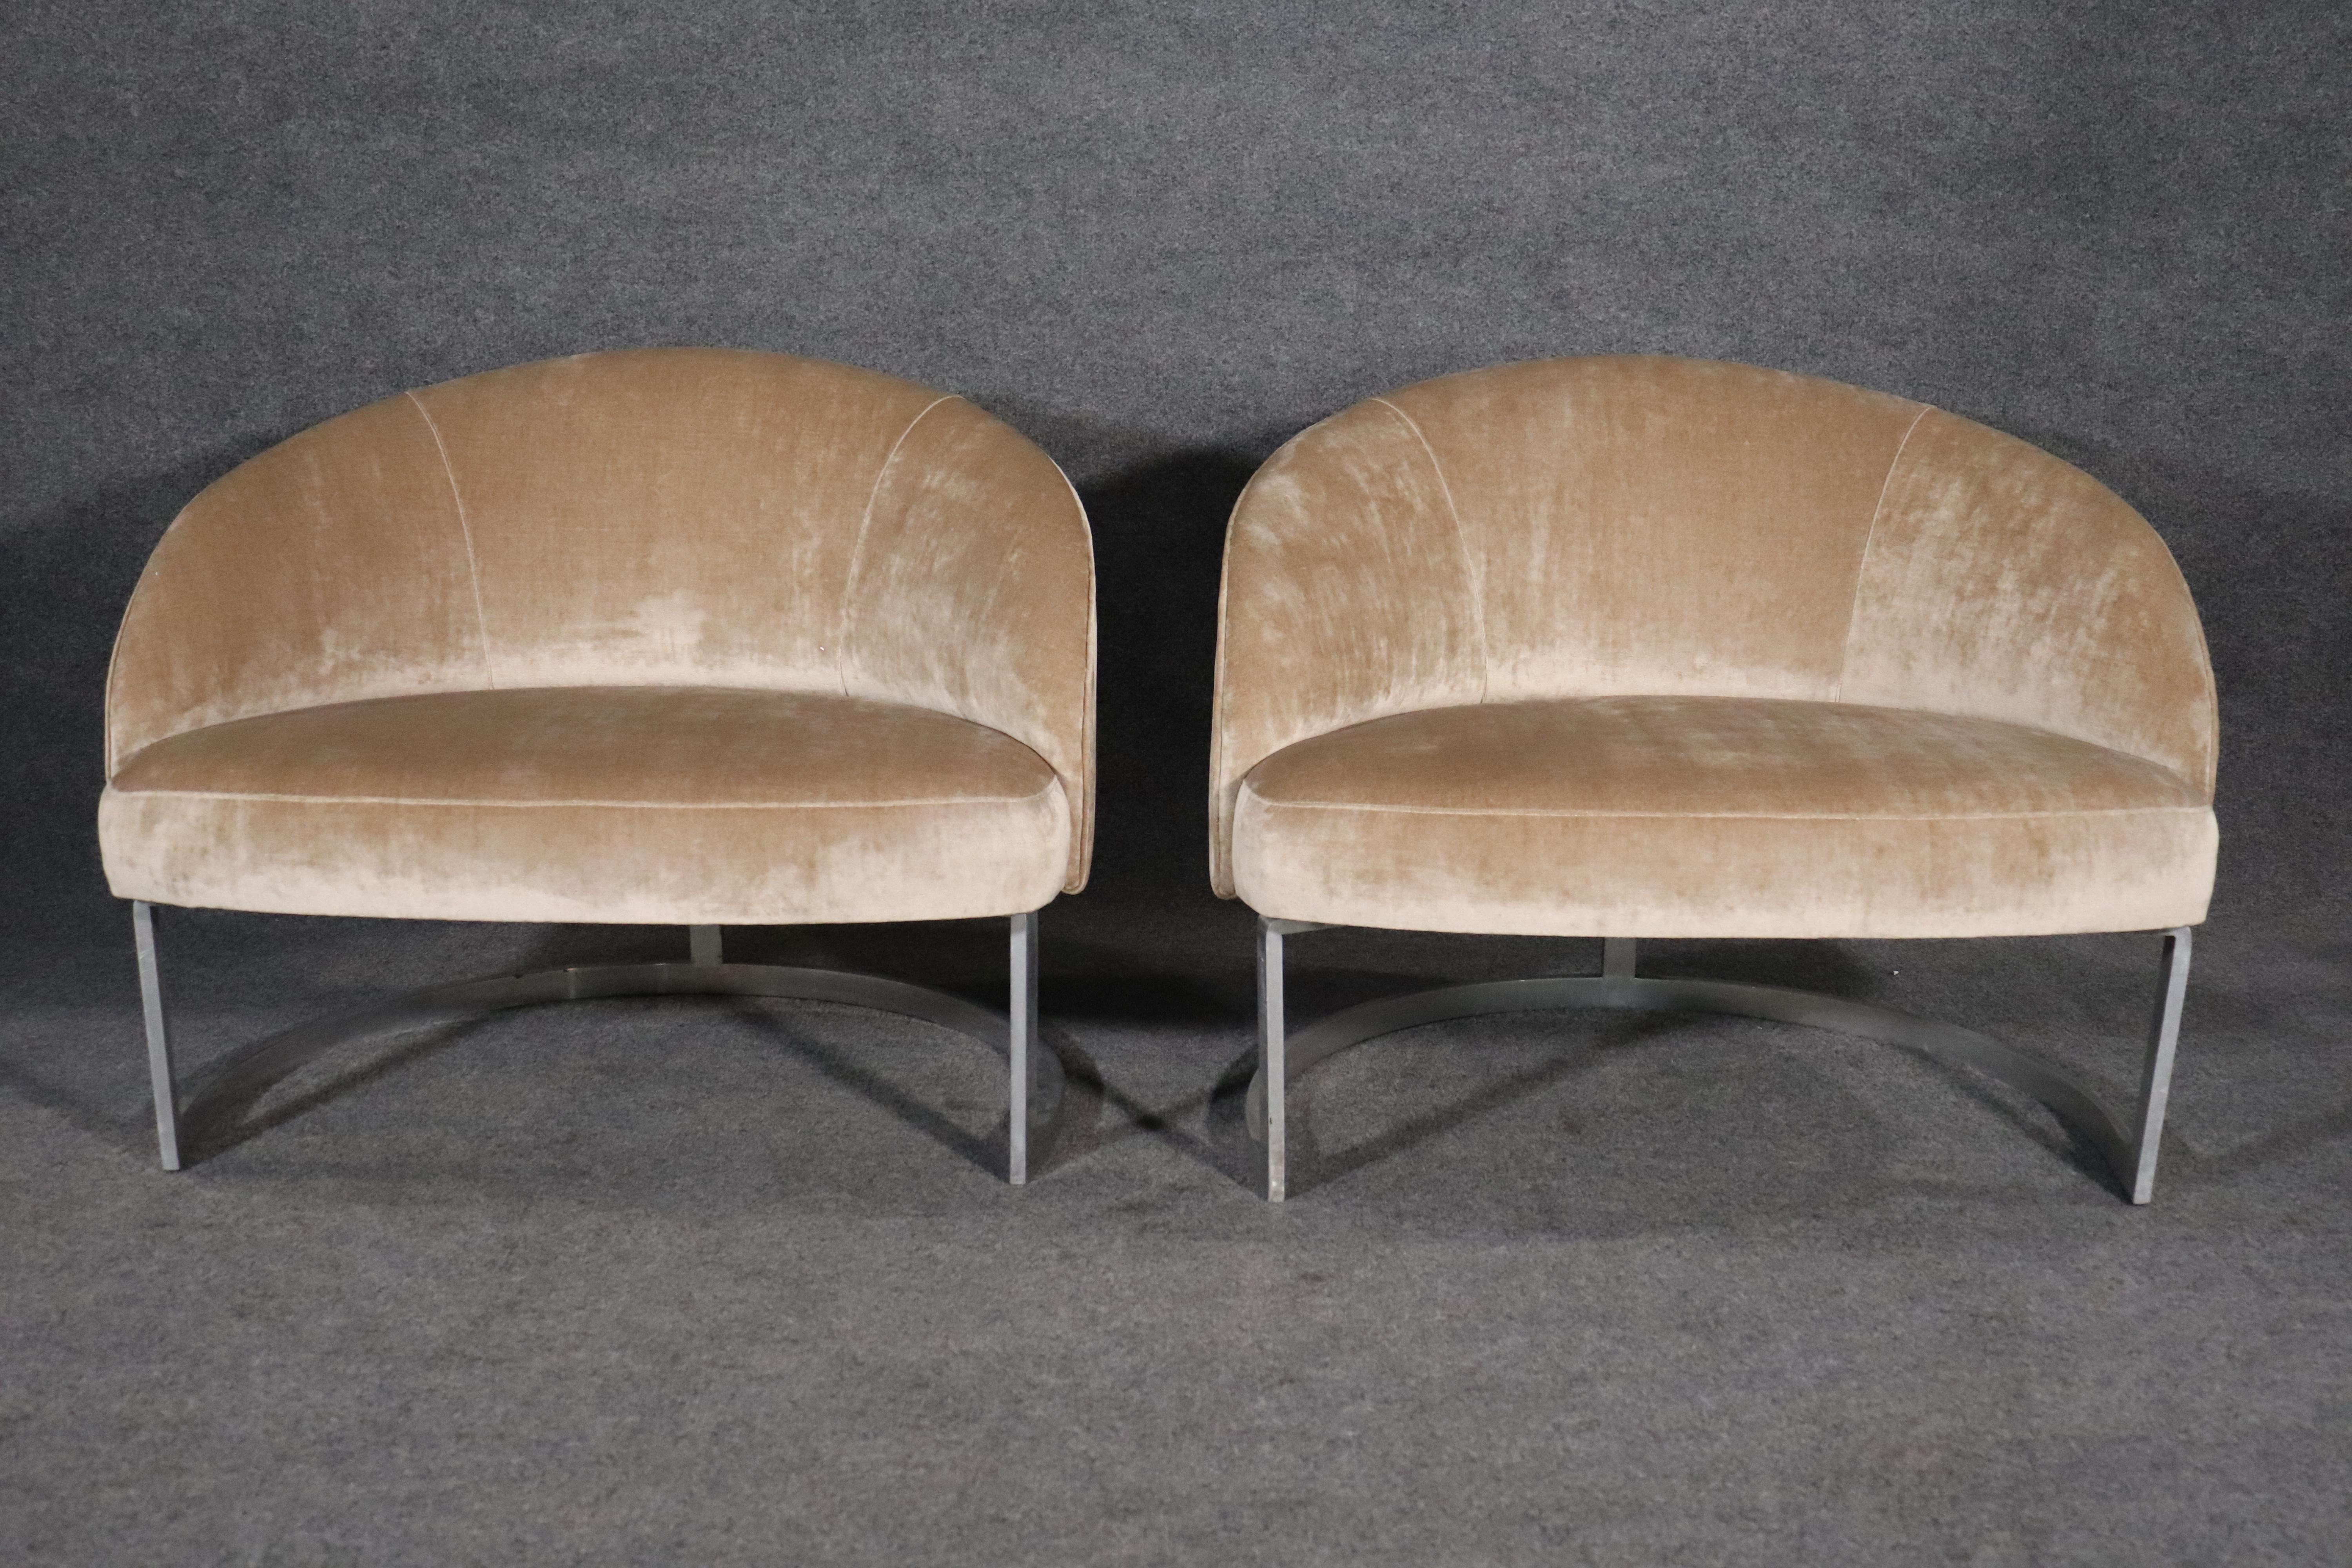 Round mid-century modern club chairs set on strong metal bases. Soft velvet like fabric accents the heavy metal base.
Please confirm location NY or NJ